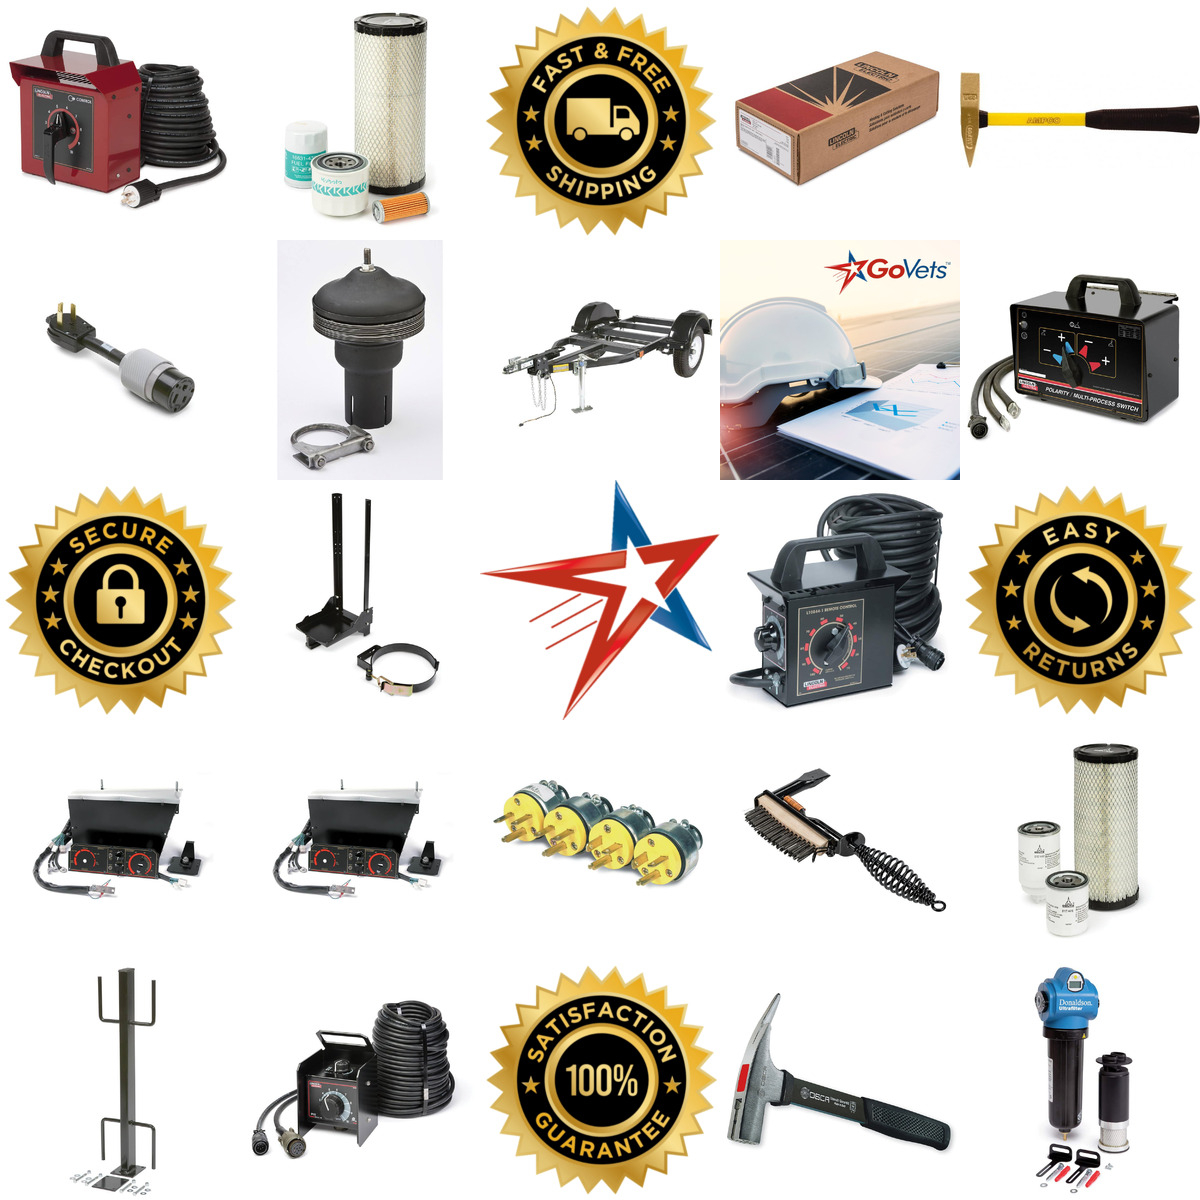 A selection of Welders and Chipping Hammers products on GoVets